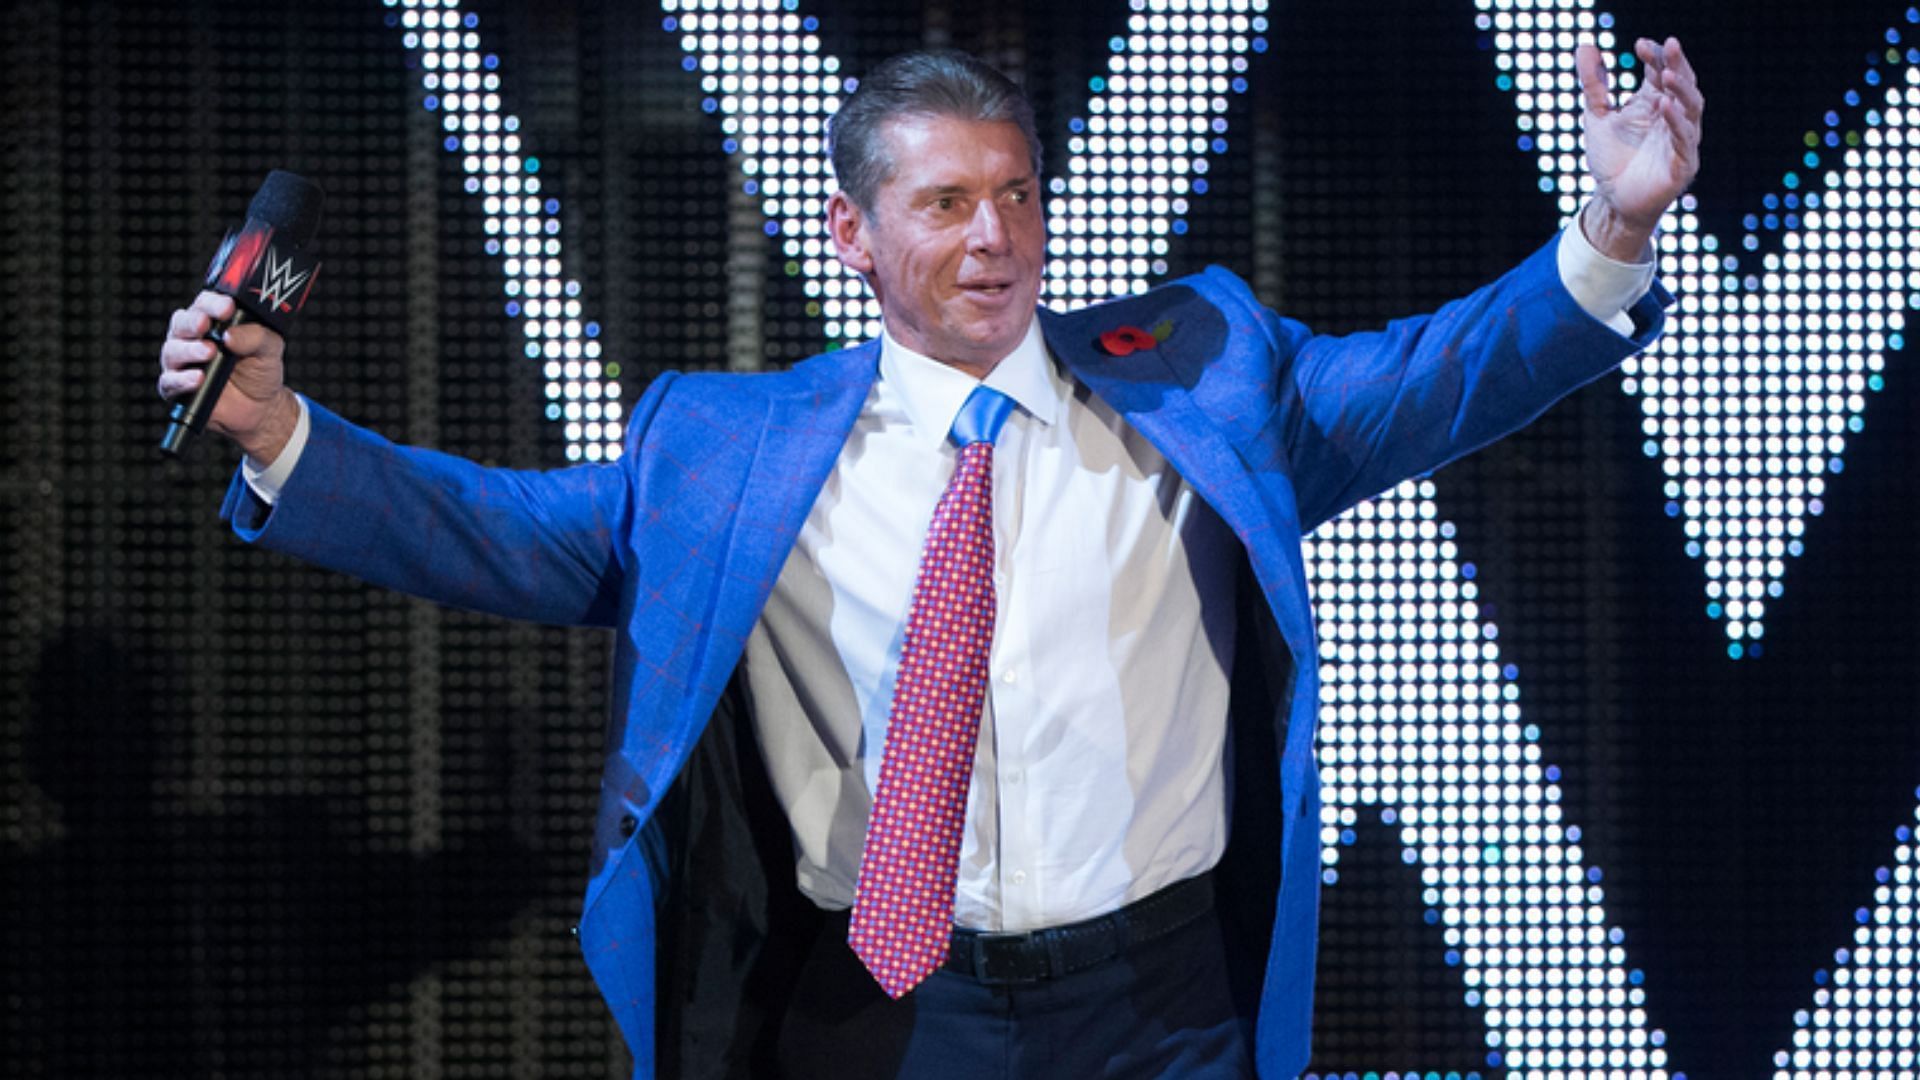 Former WWE CEO Vince McMahon posing on the entrance ramp